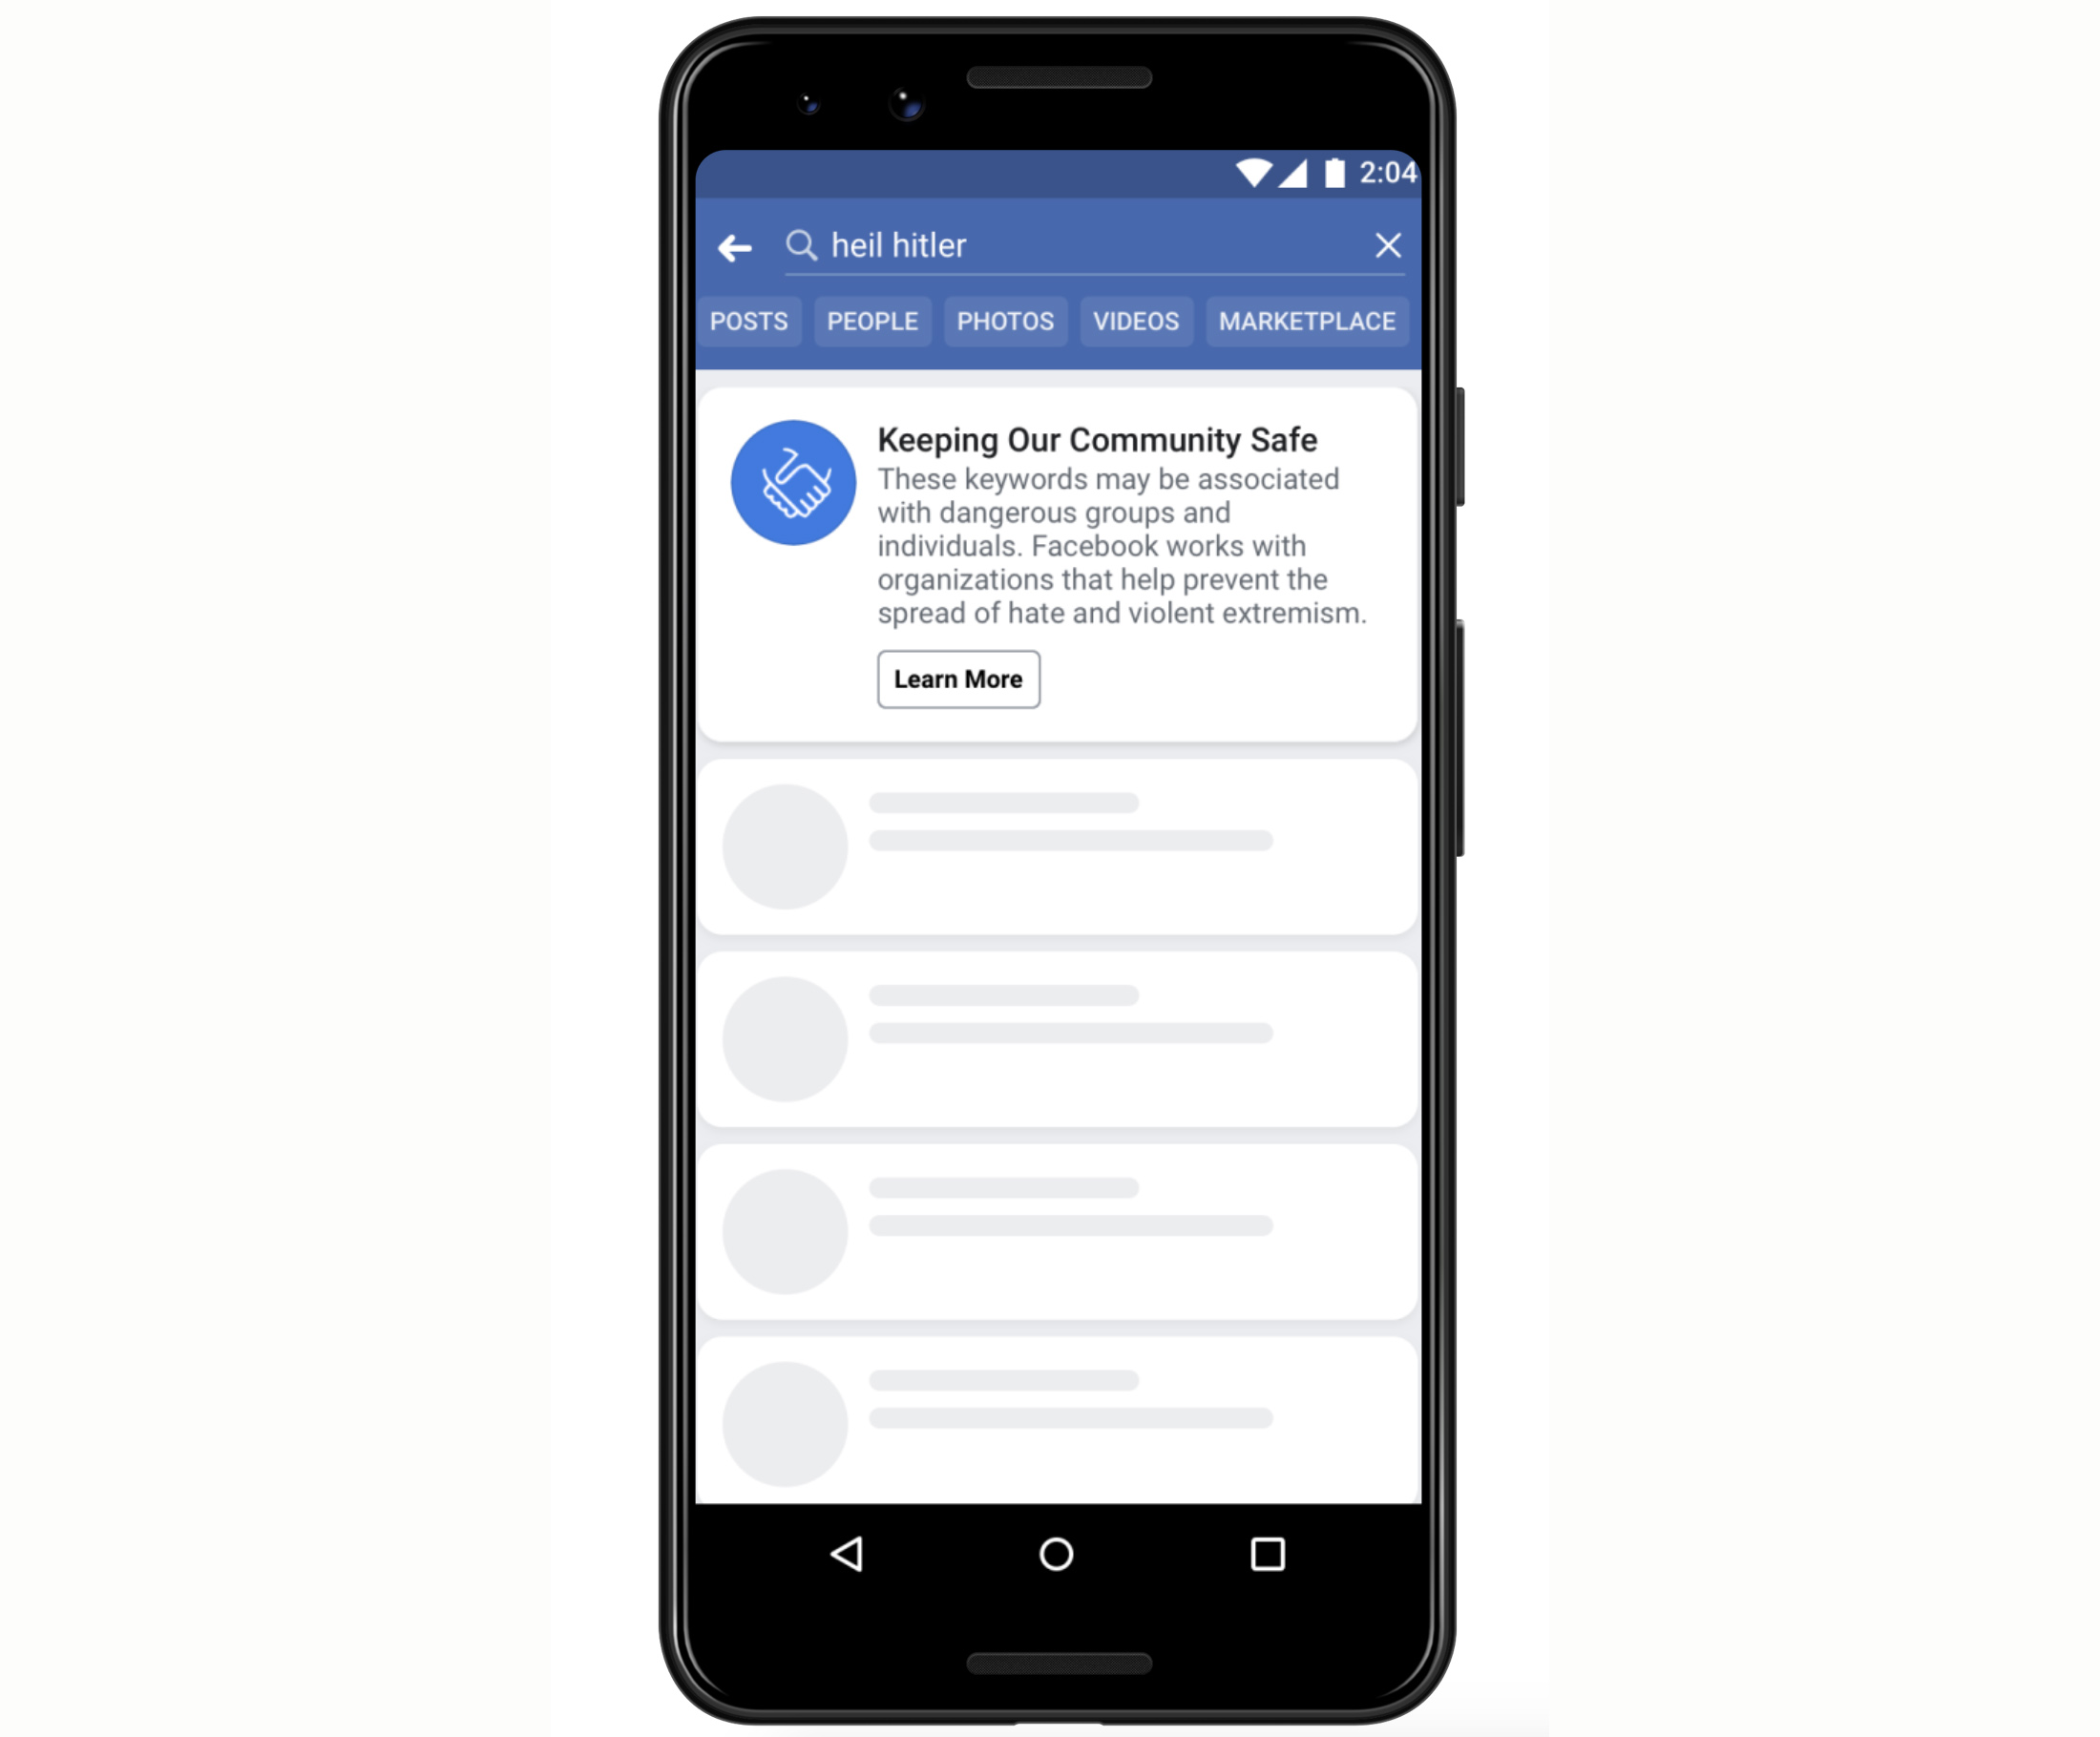 PHOTO: Facebook announced on March 27, 2019 that, "searches for terms associated with white supremacy will surface a link to Life After Hate's Page, where people can find support in the form of education, interventions, academic research and outreach."